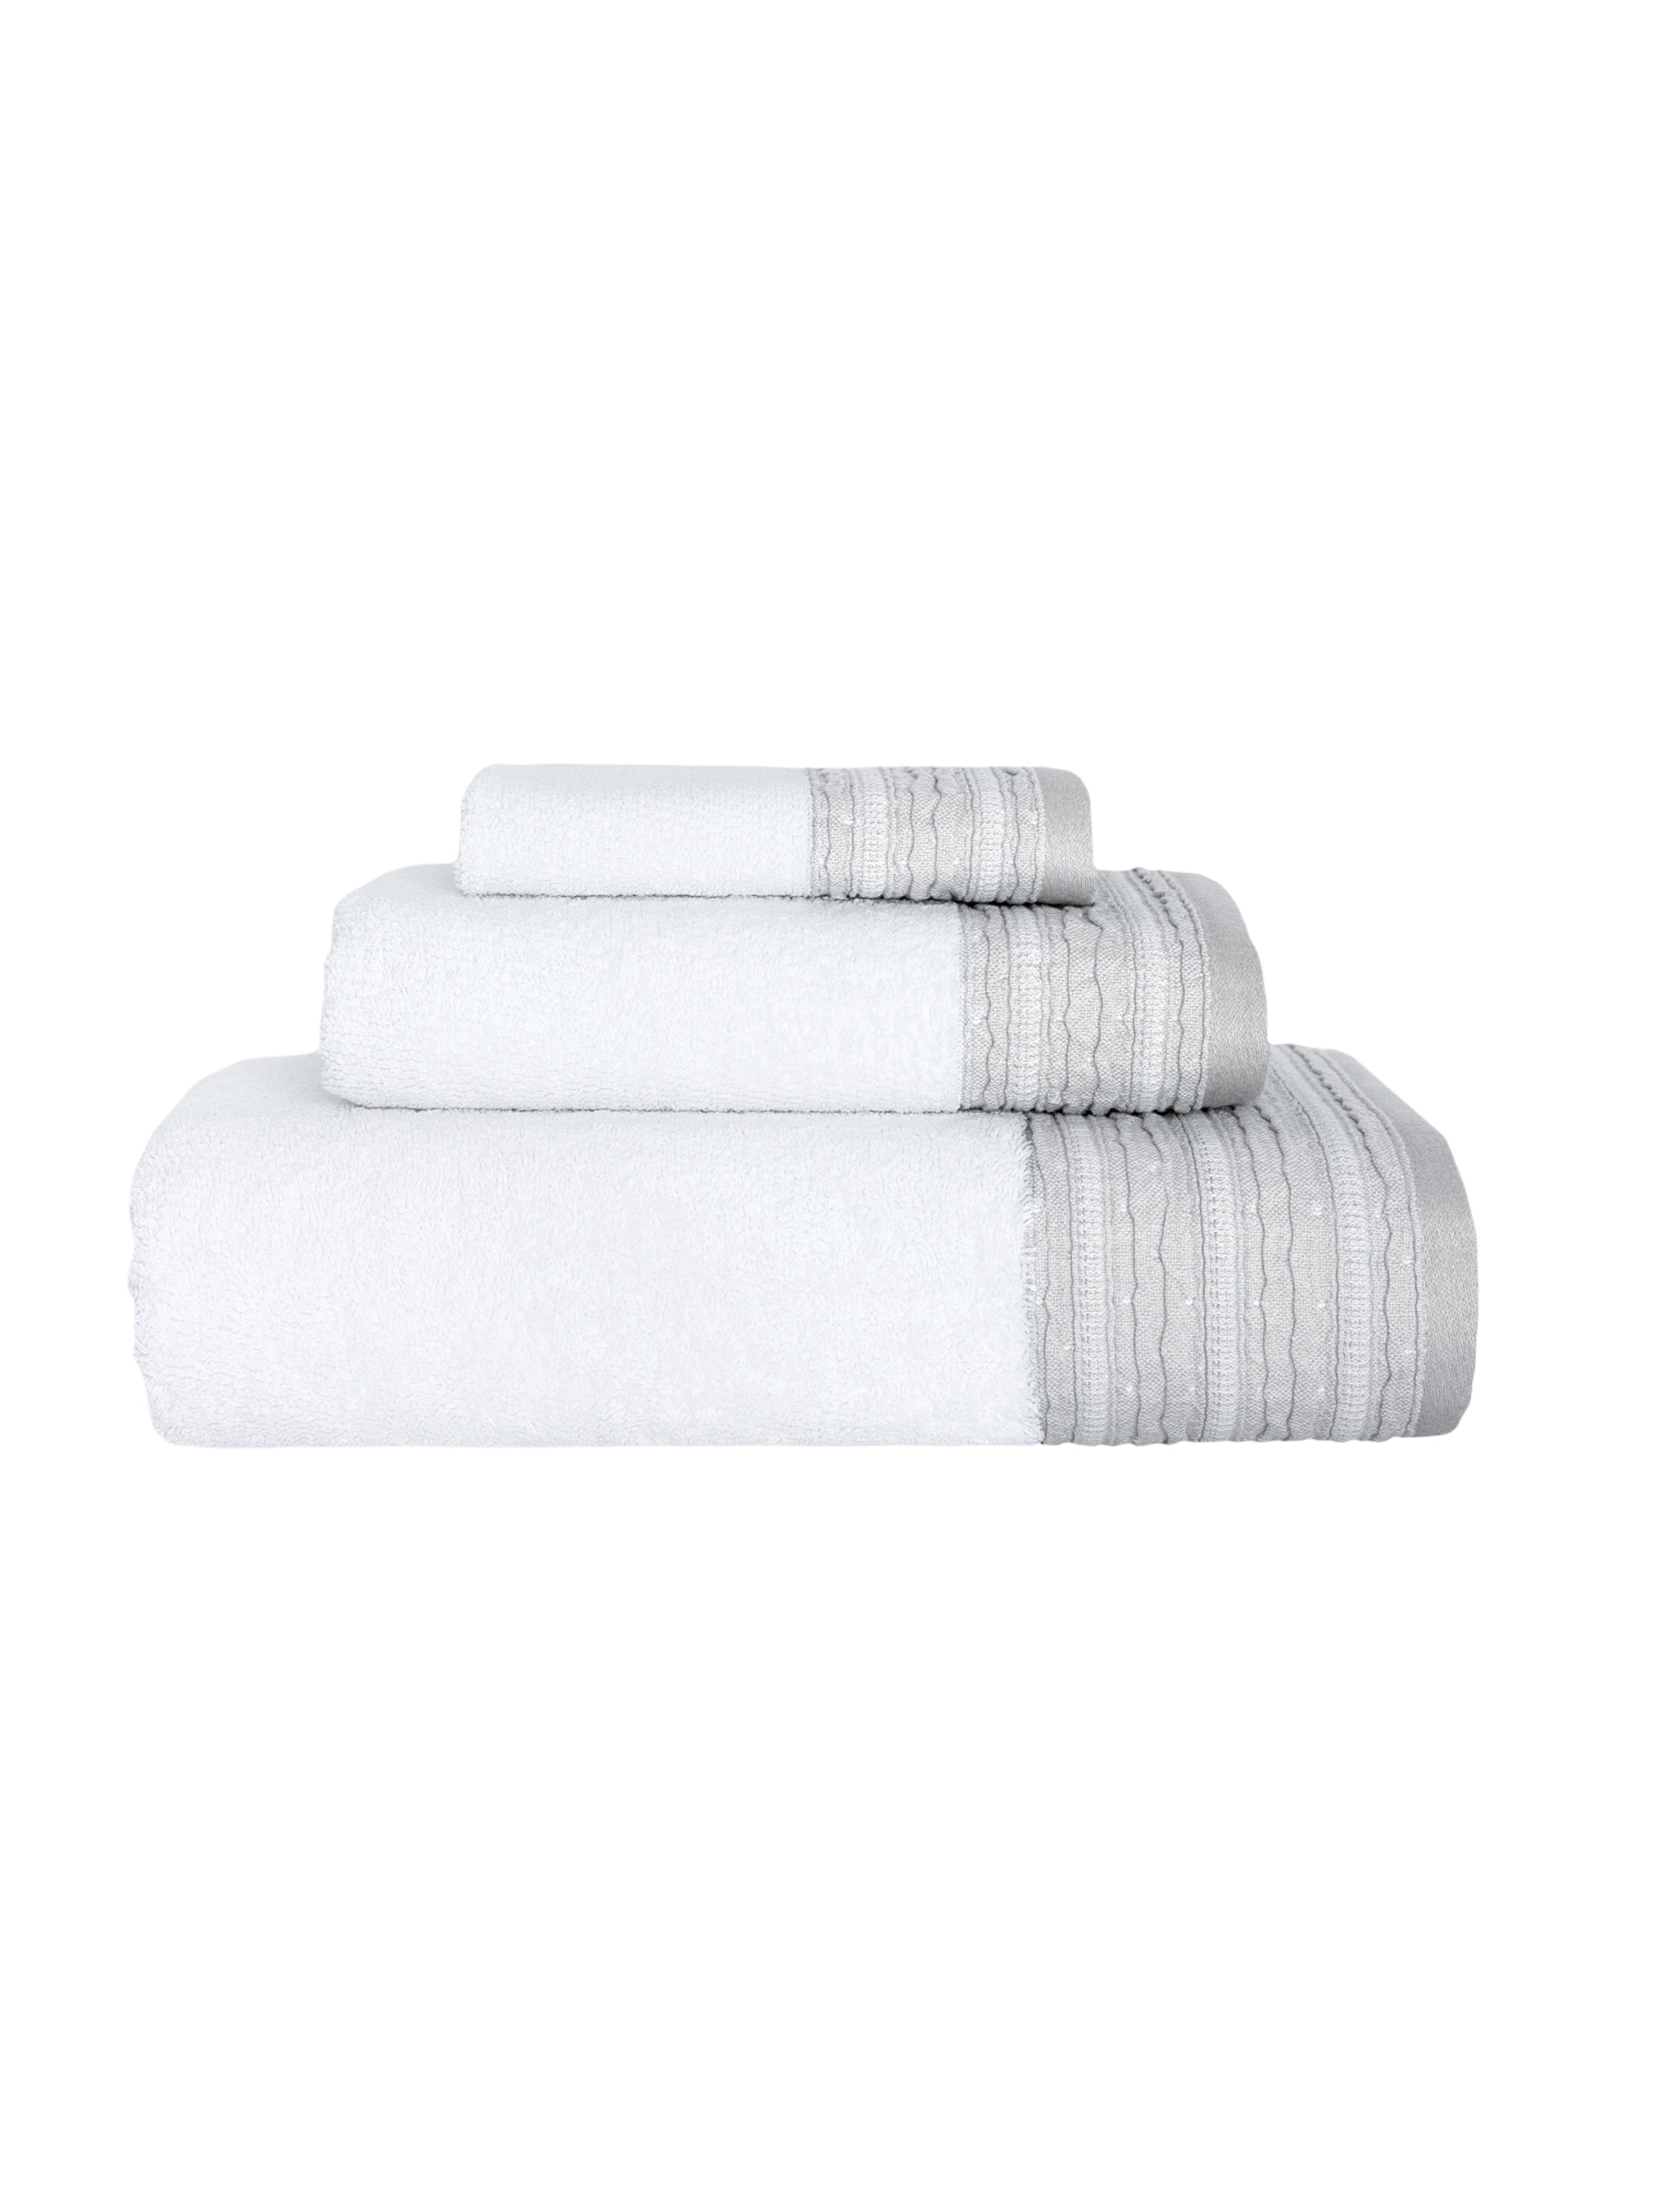 Classic Turkish Towels Genuine Cotton Soft Absorbent Carel And Garen 6 Piece  In Grey